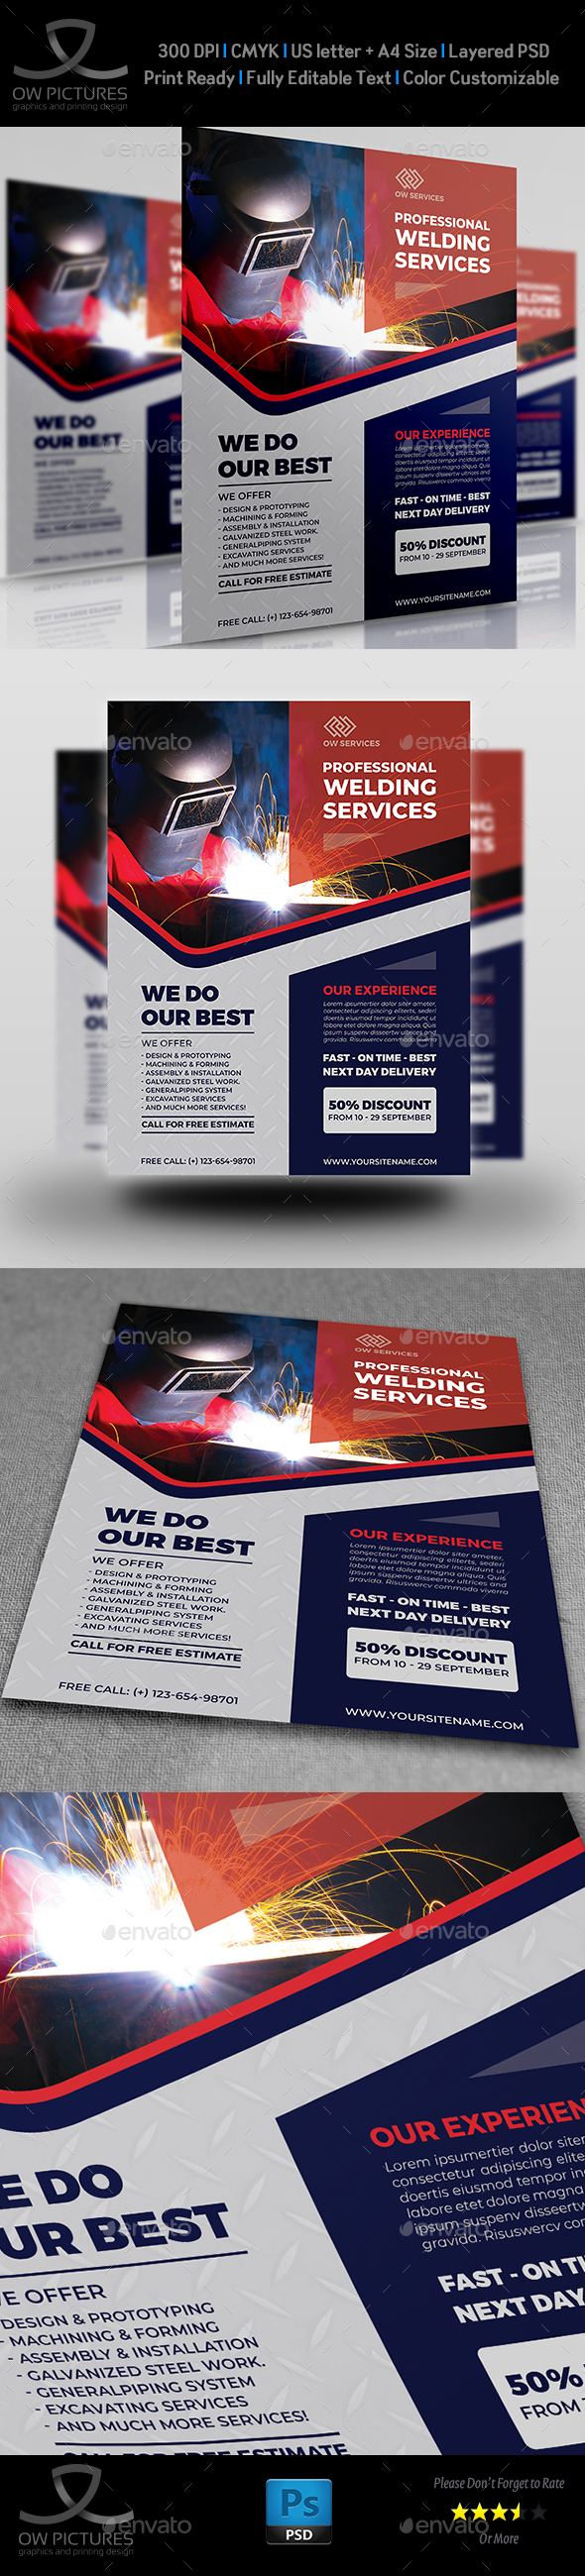 Welding Services Flyer Template